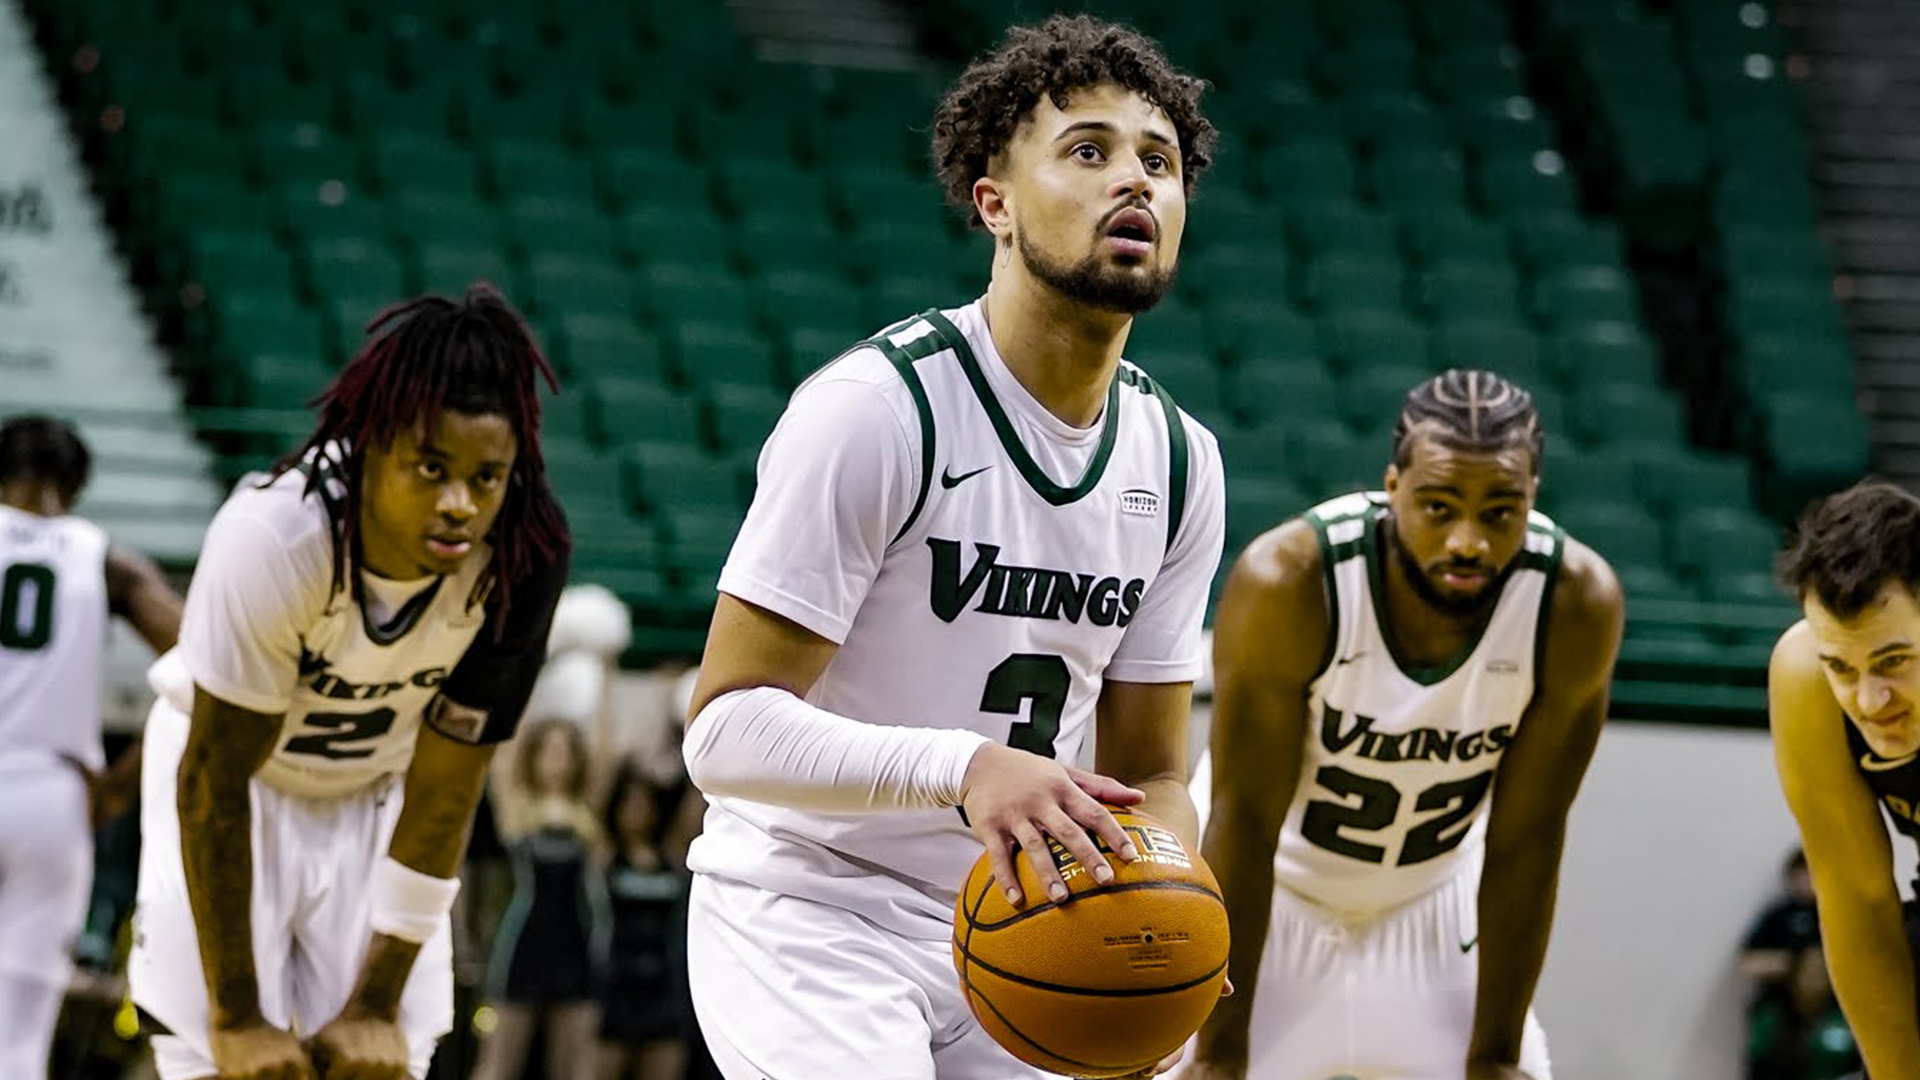 Cleveland State Men’s Basketball Earns Home Victory over Oakland